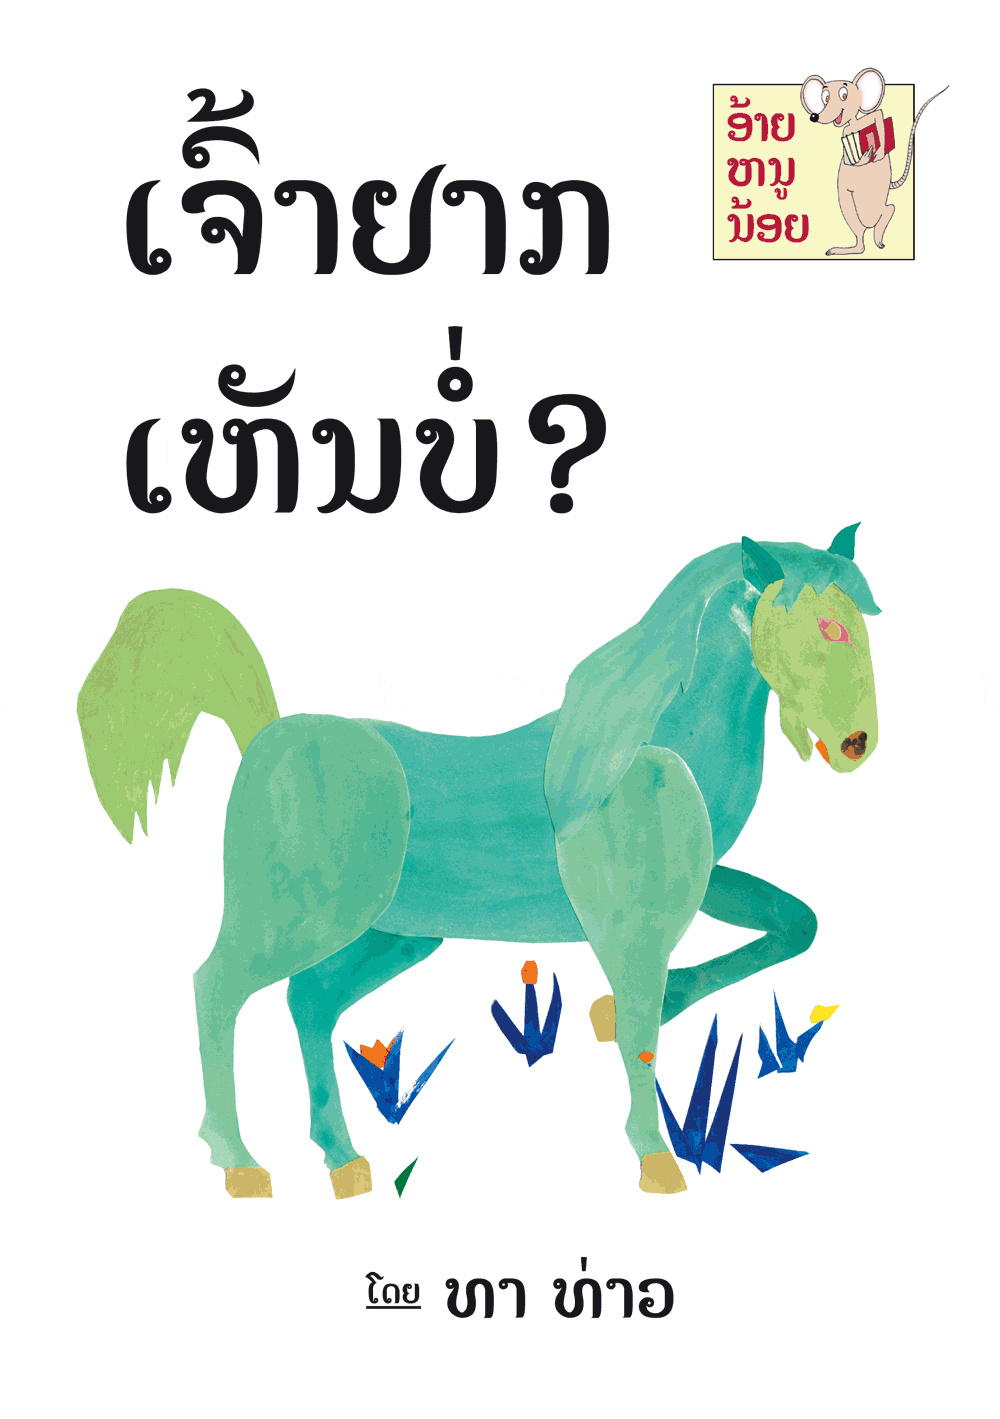 Do You Want to See? large book cover, published in Lao language